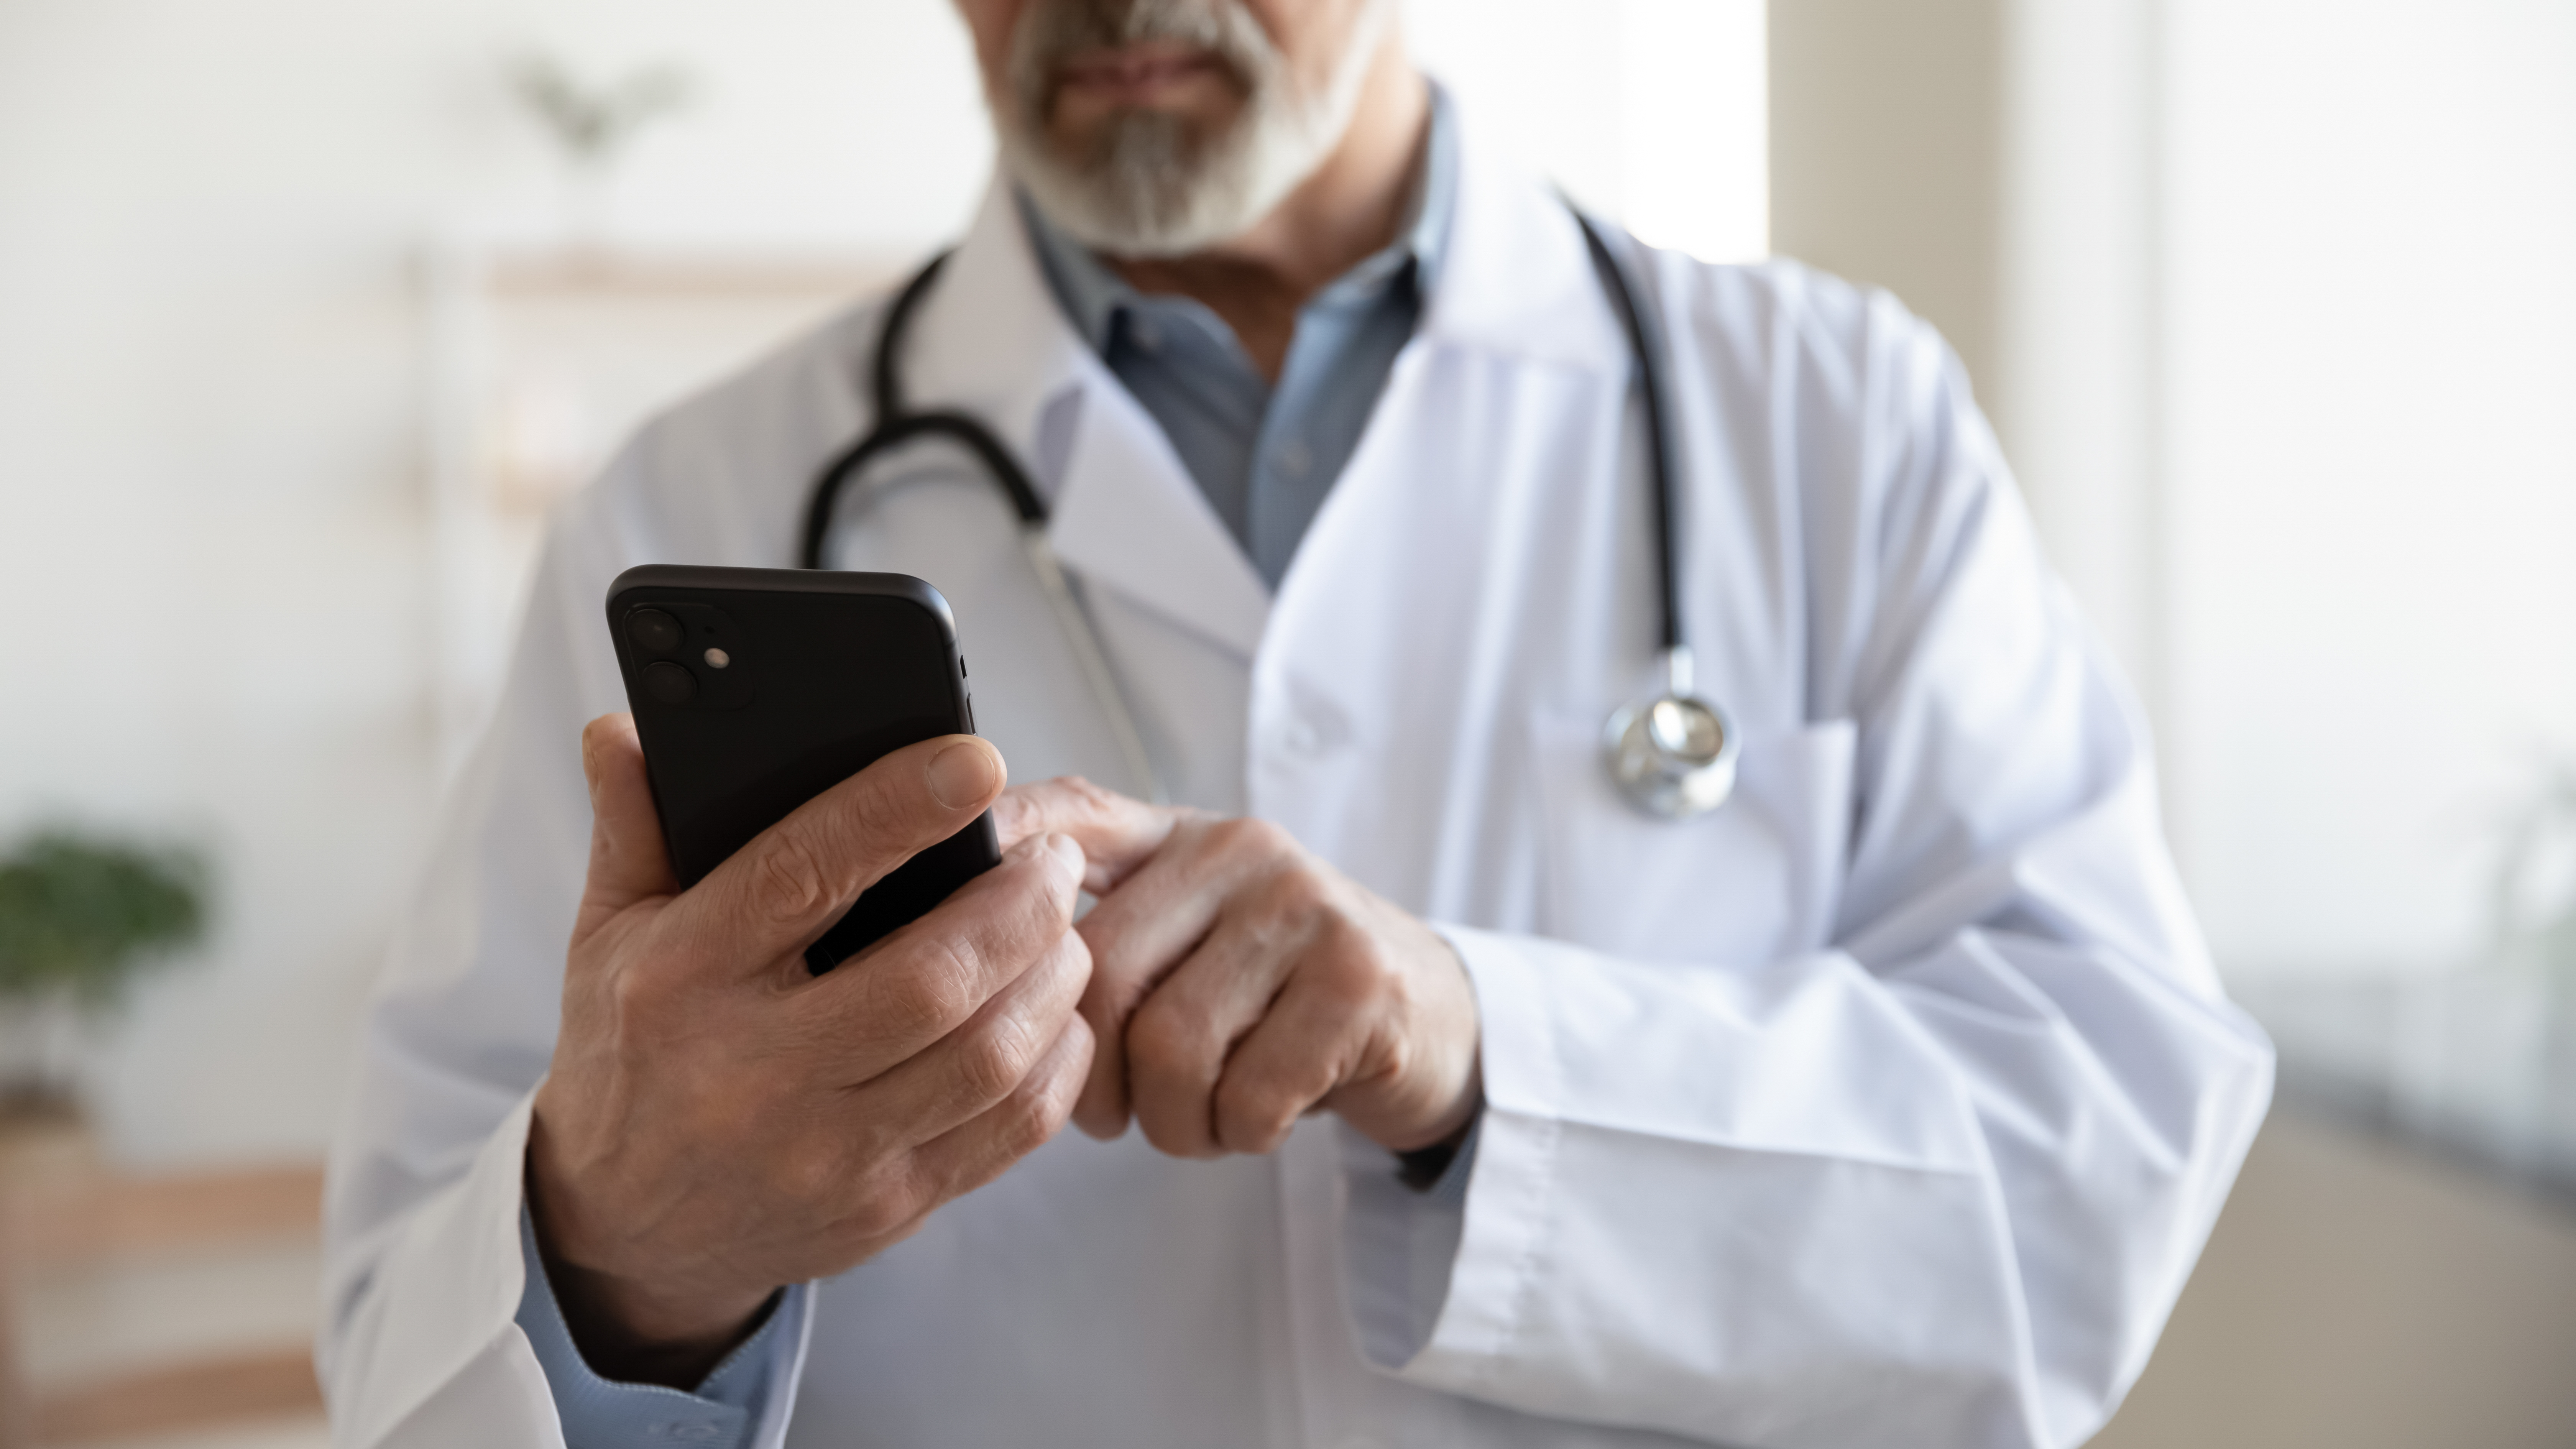 Secure texting is the future of healthcare